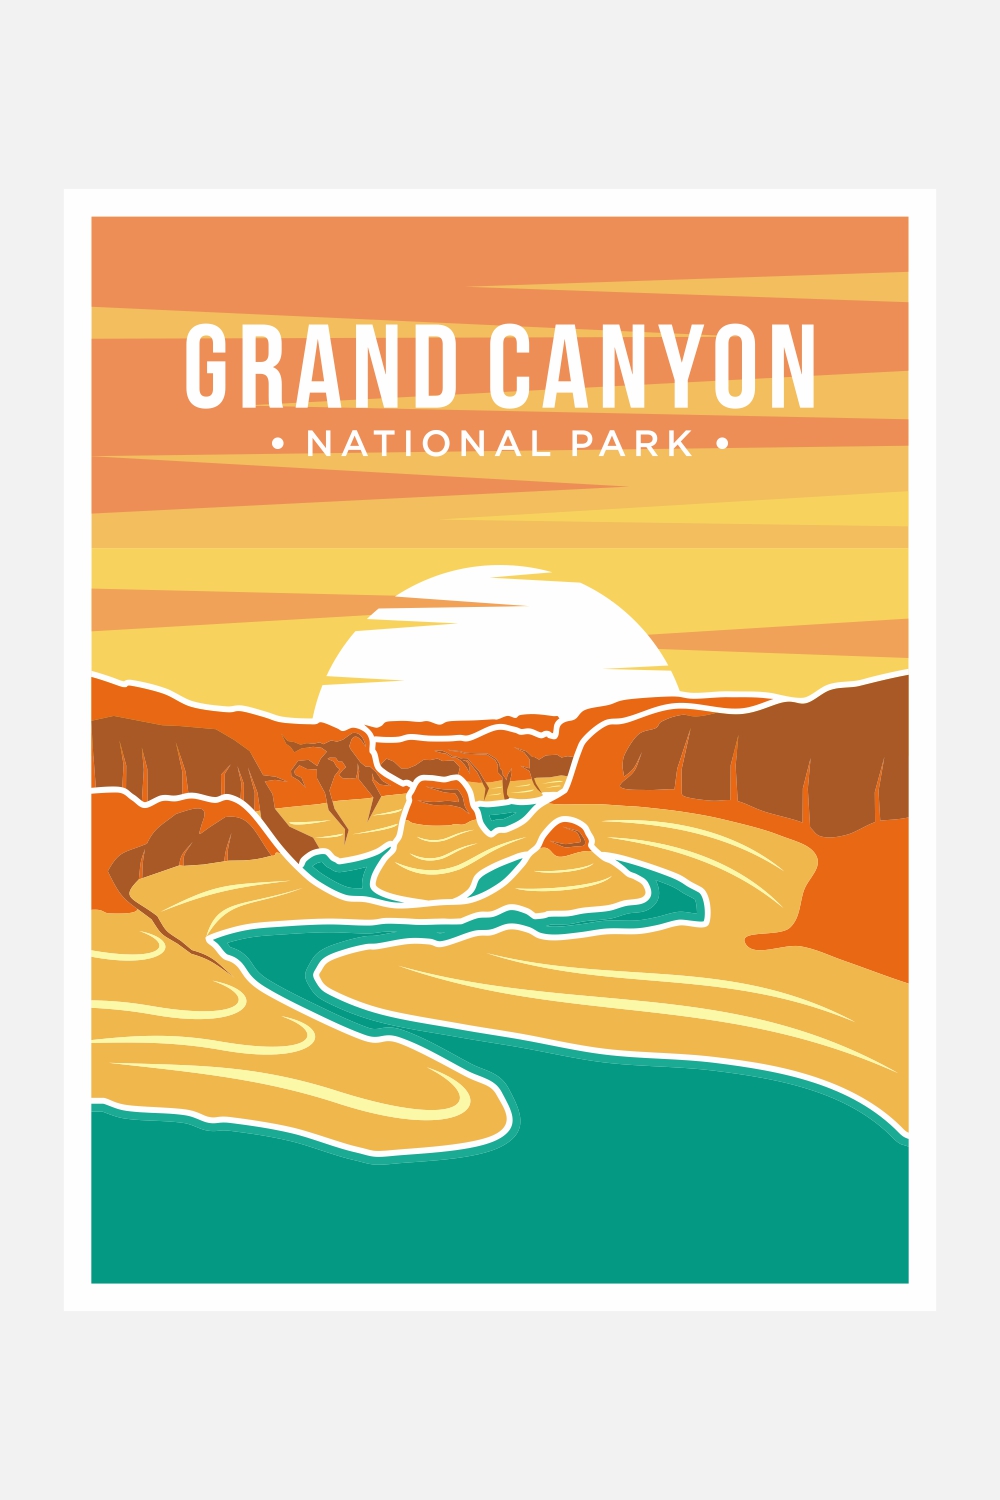 Grand Canyon National Park poster vector illustration design – Only $8 pinterest preview image.